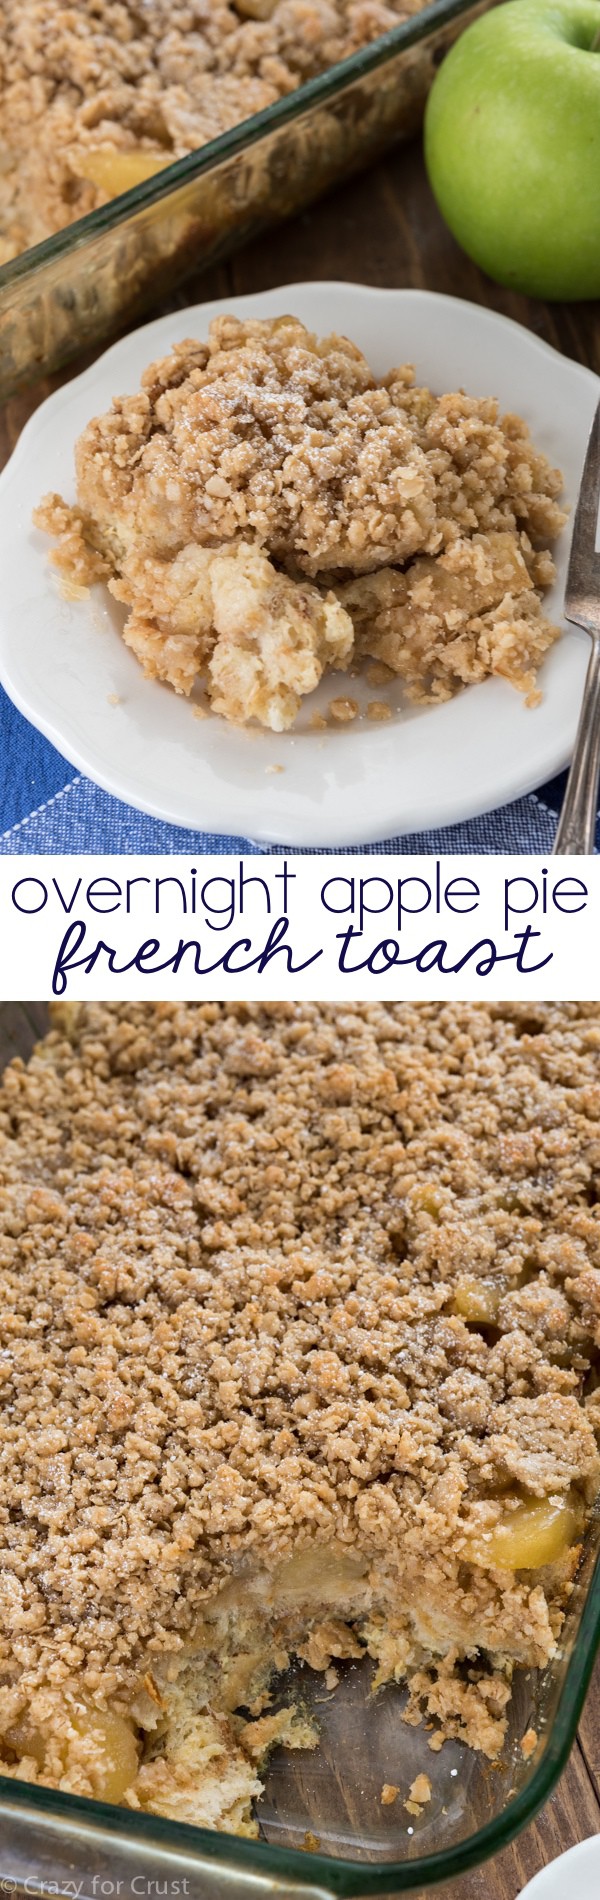 Overnight Apple Pie French Toast Casserole - like a pie for breakfast! A great brunch recipe that's easy and delicious.